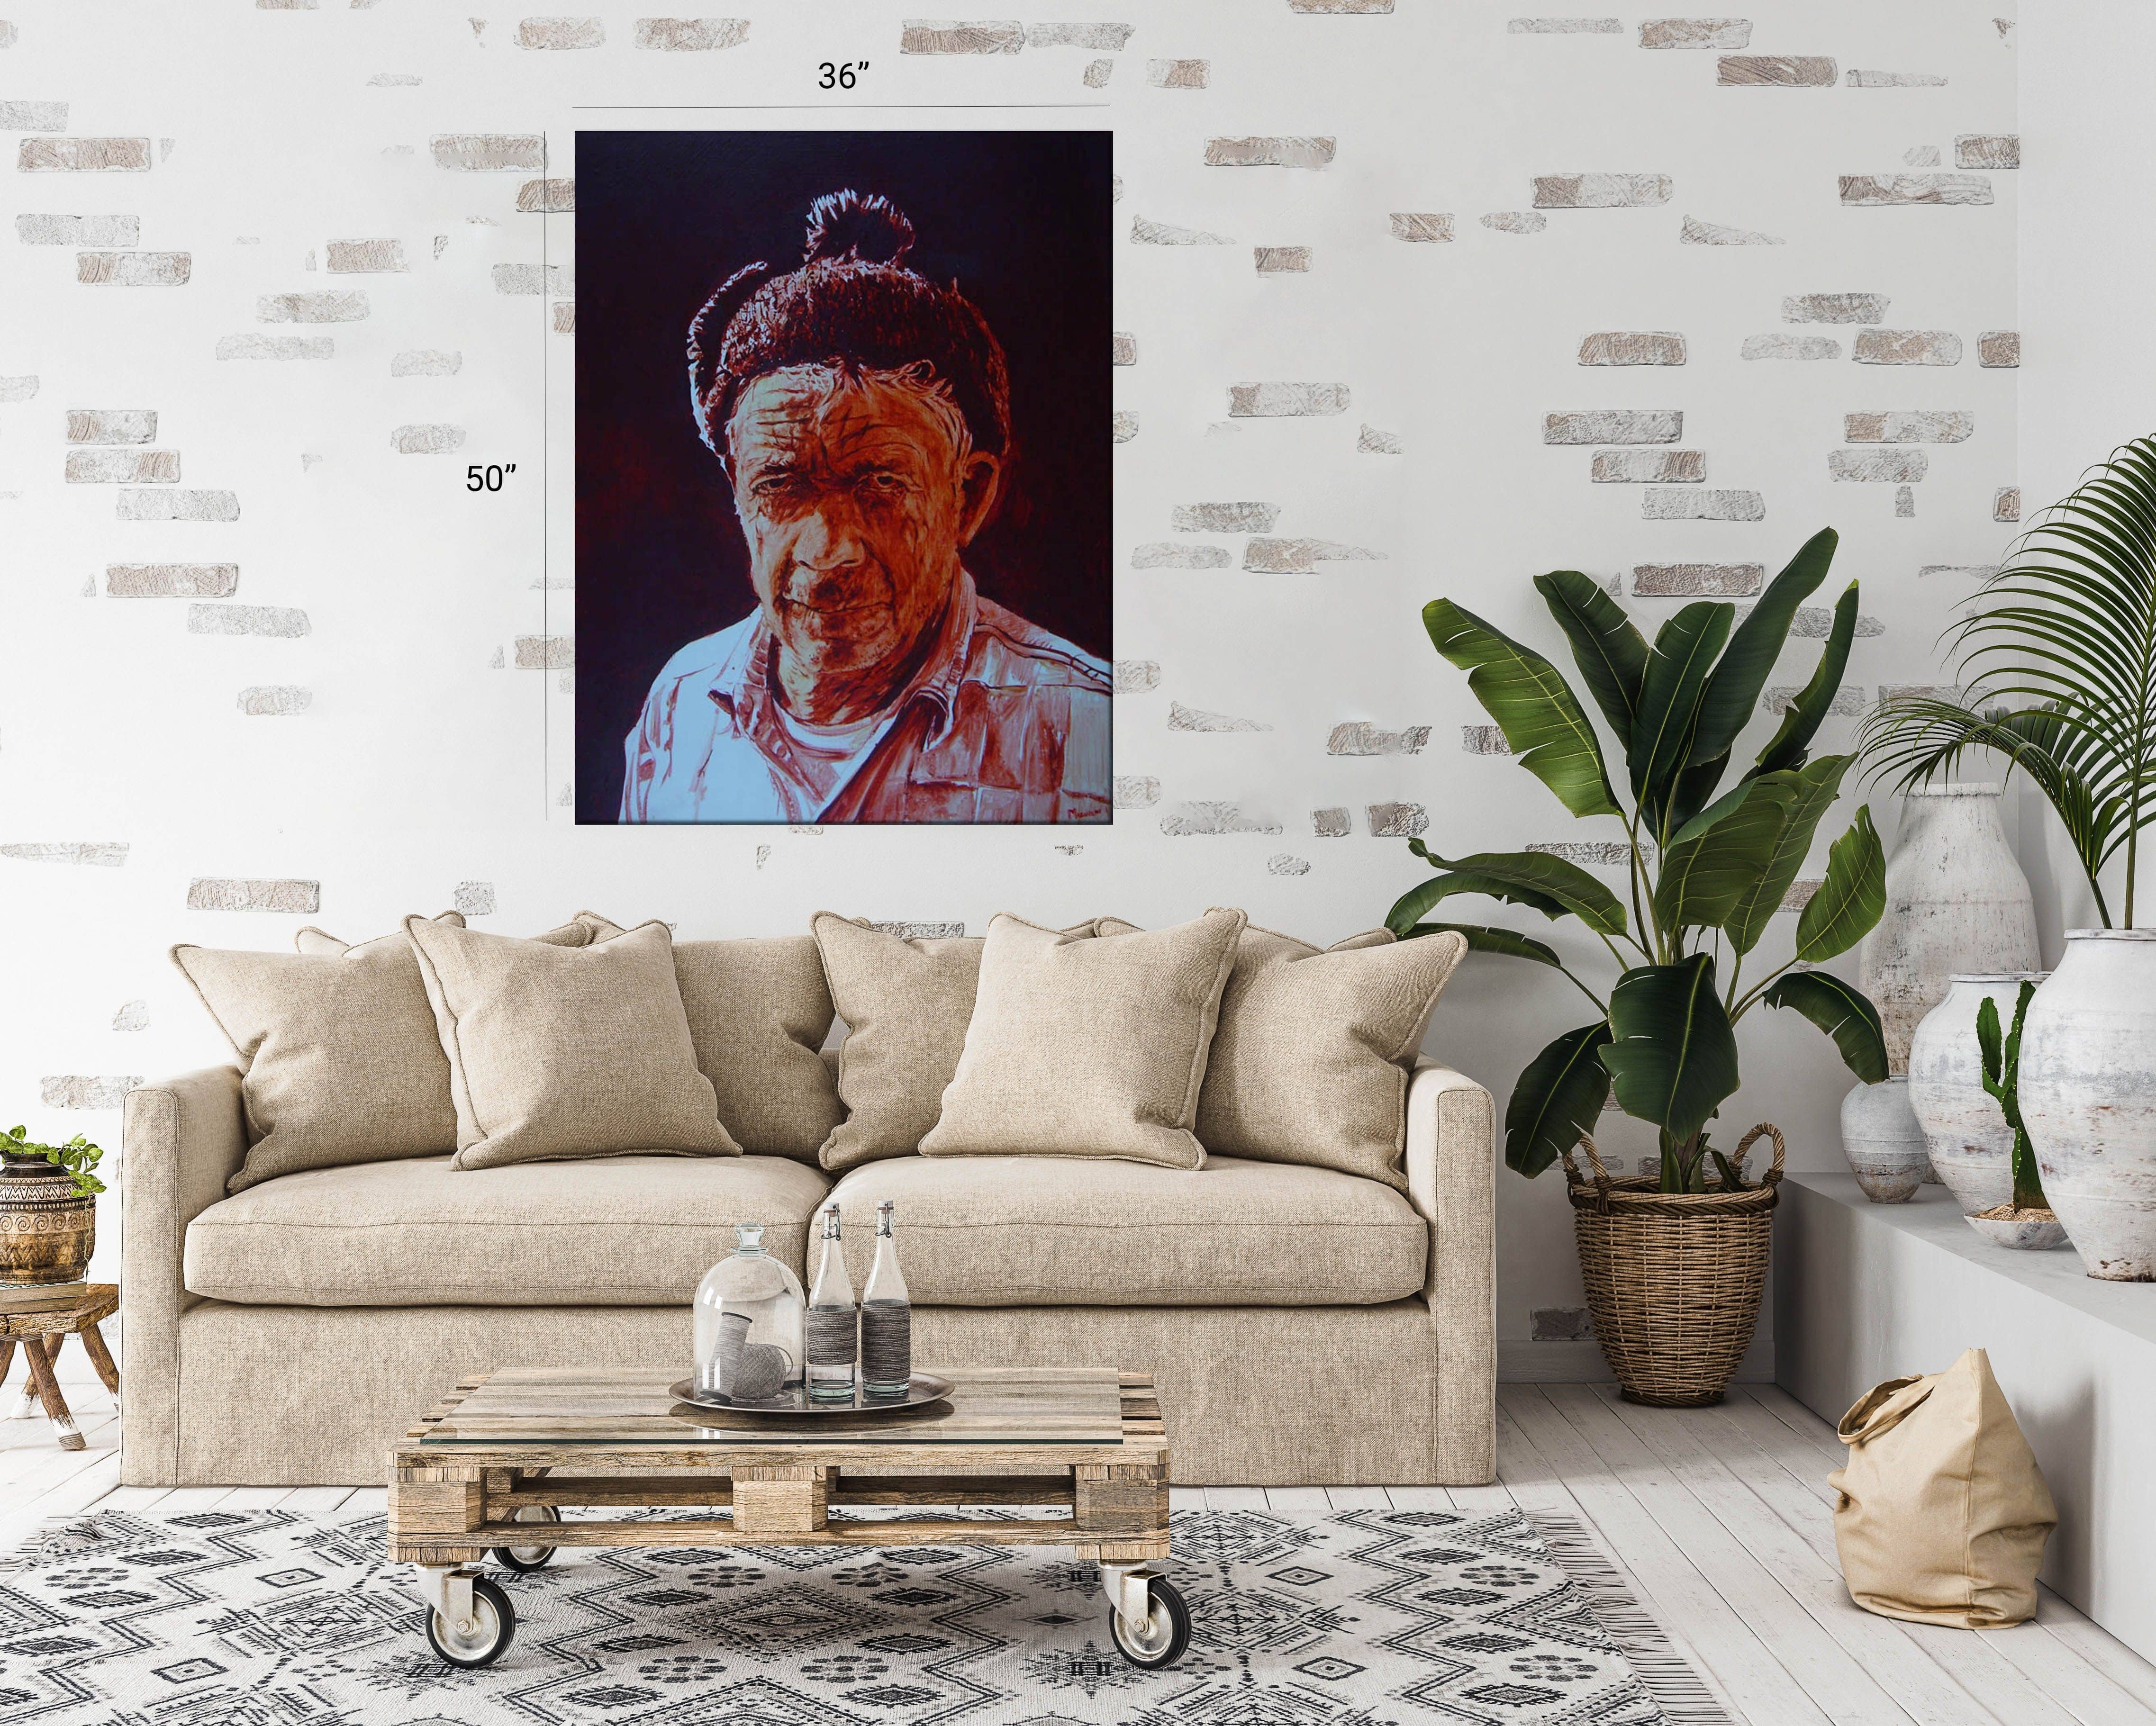 Painting of Santana displayed in a rustic living room on the wall